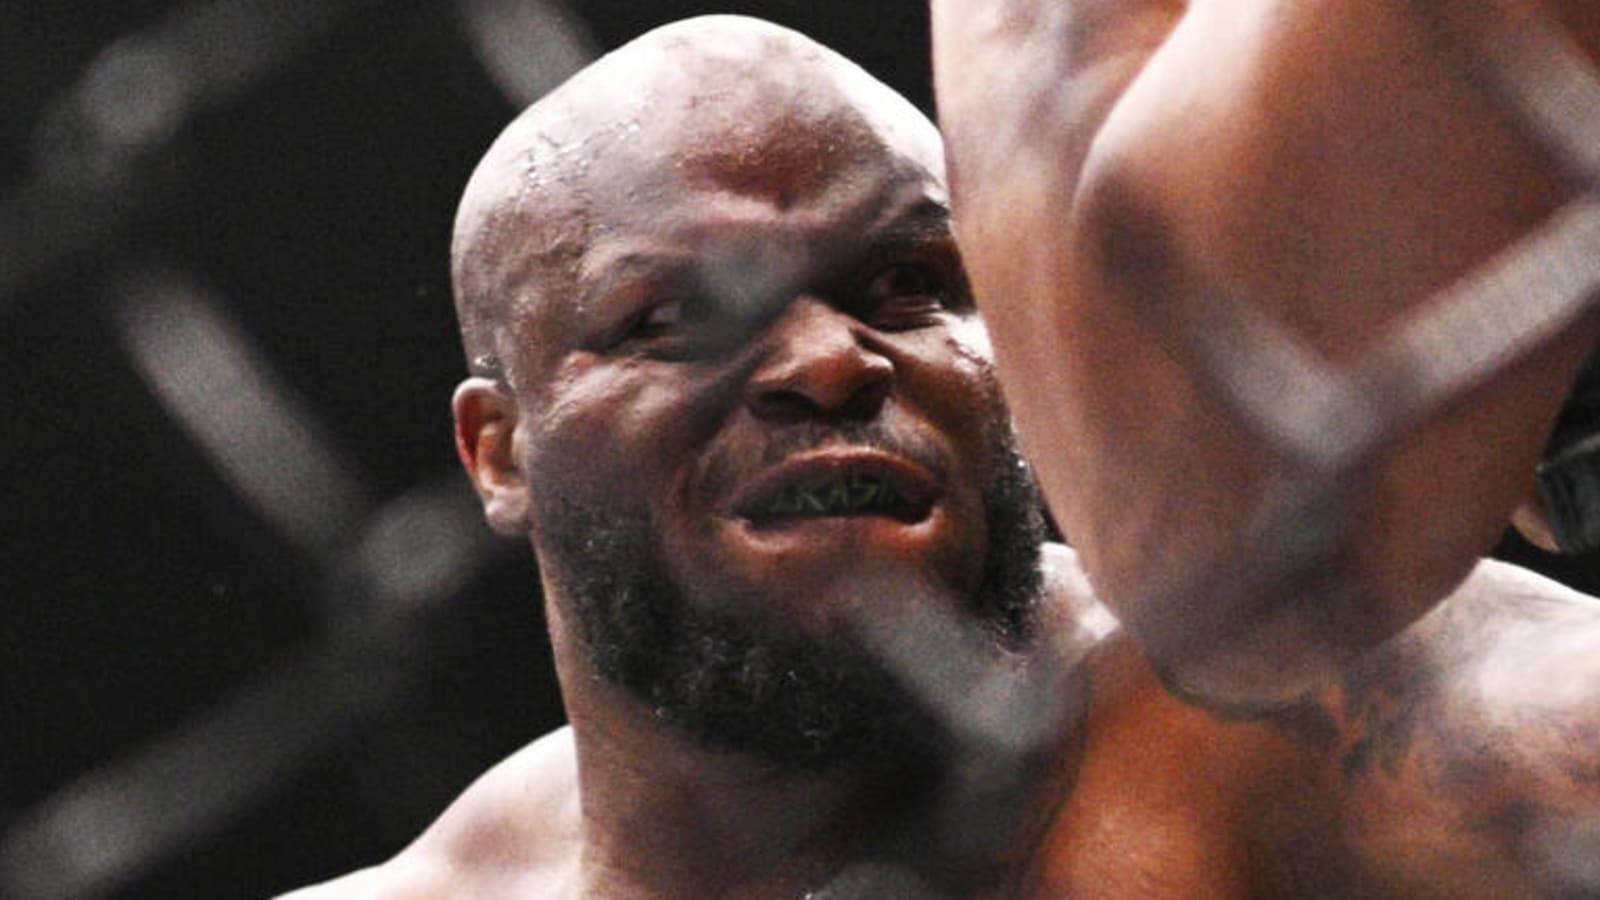 'Wouldn’t stop here,' Derrick Lewis wants to dabble in WWE side hustle, but not at cost of building more knockdown victories